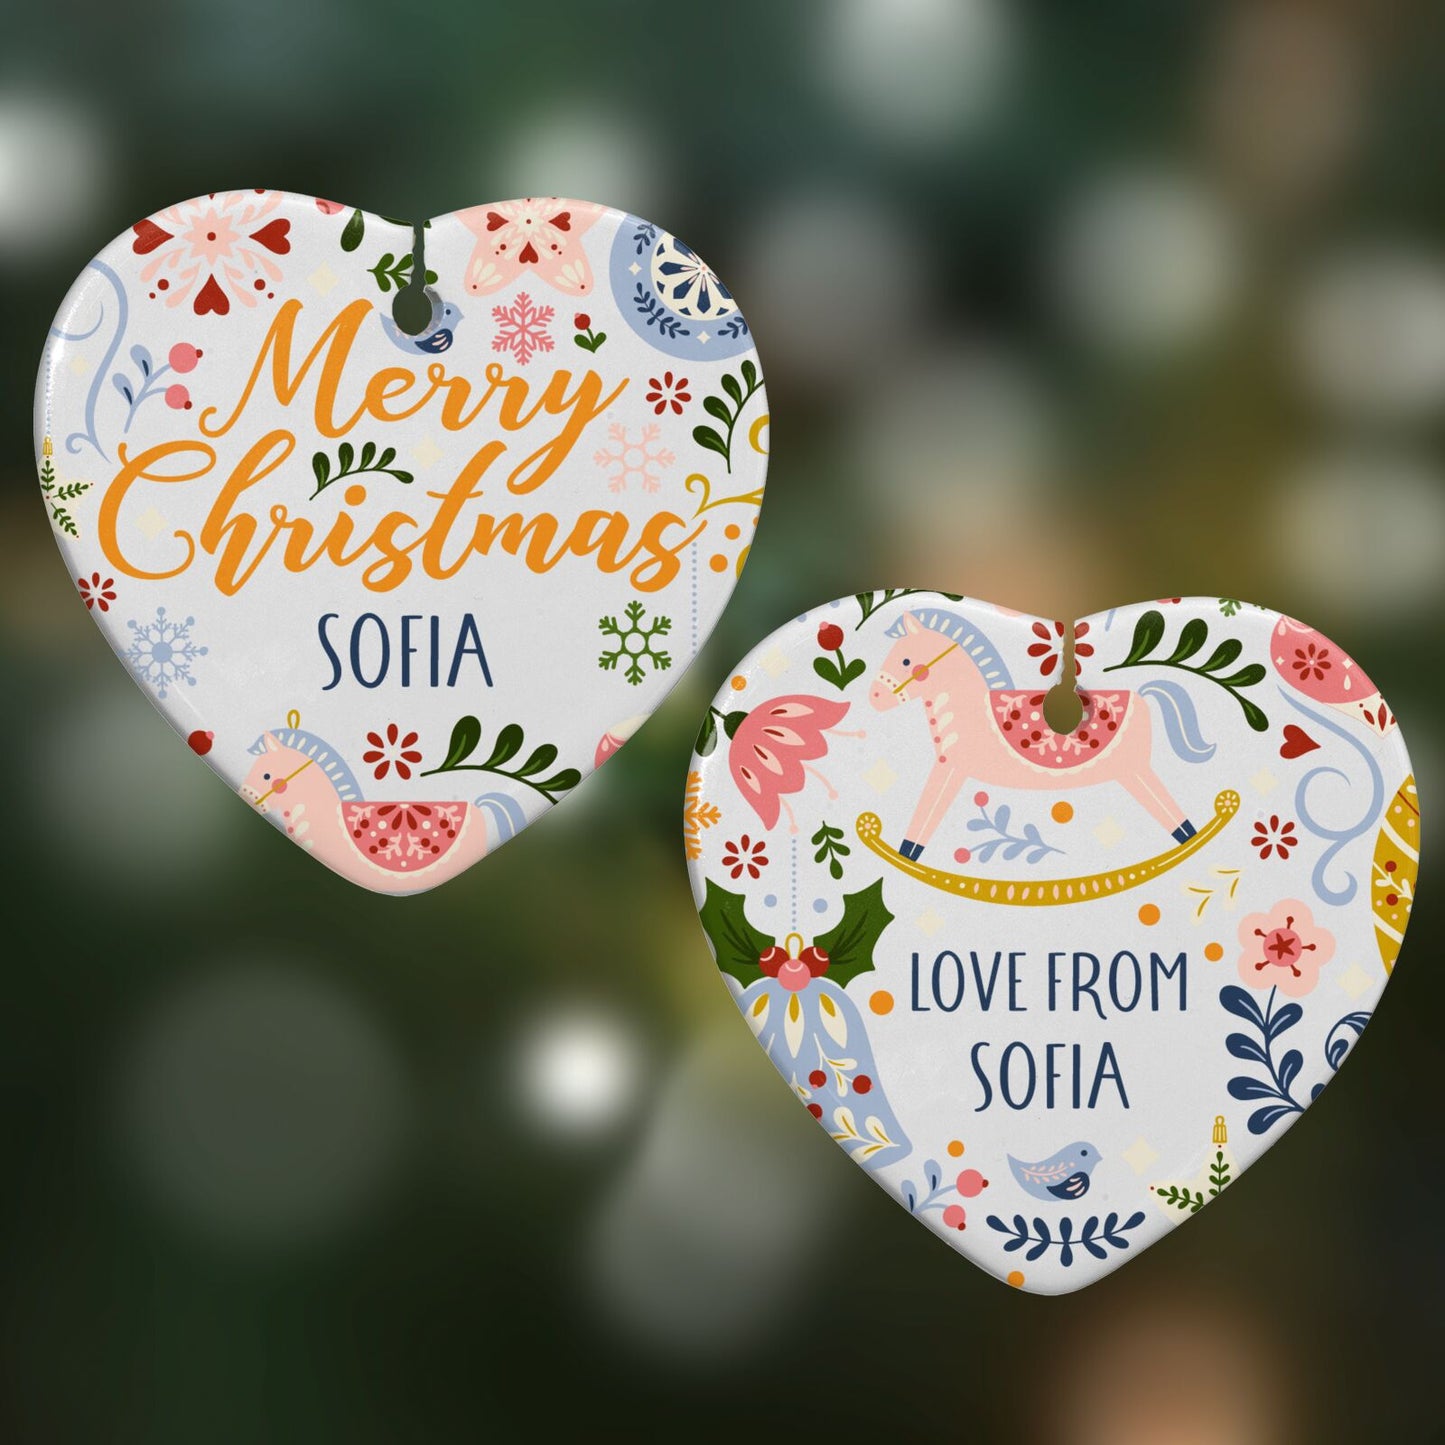 Merry Christmas Illustrated Heart Decoration on Christmas Background